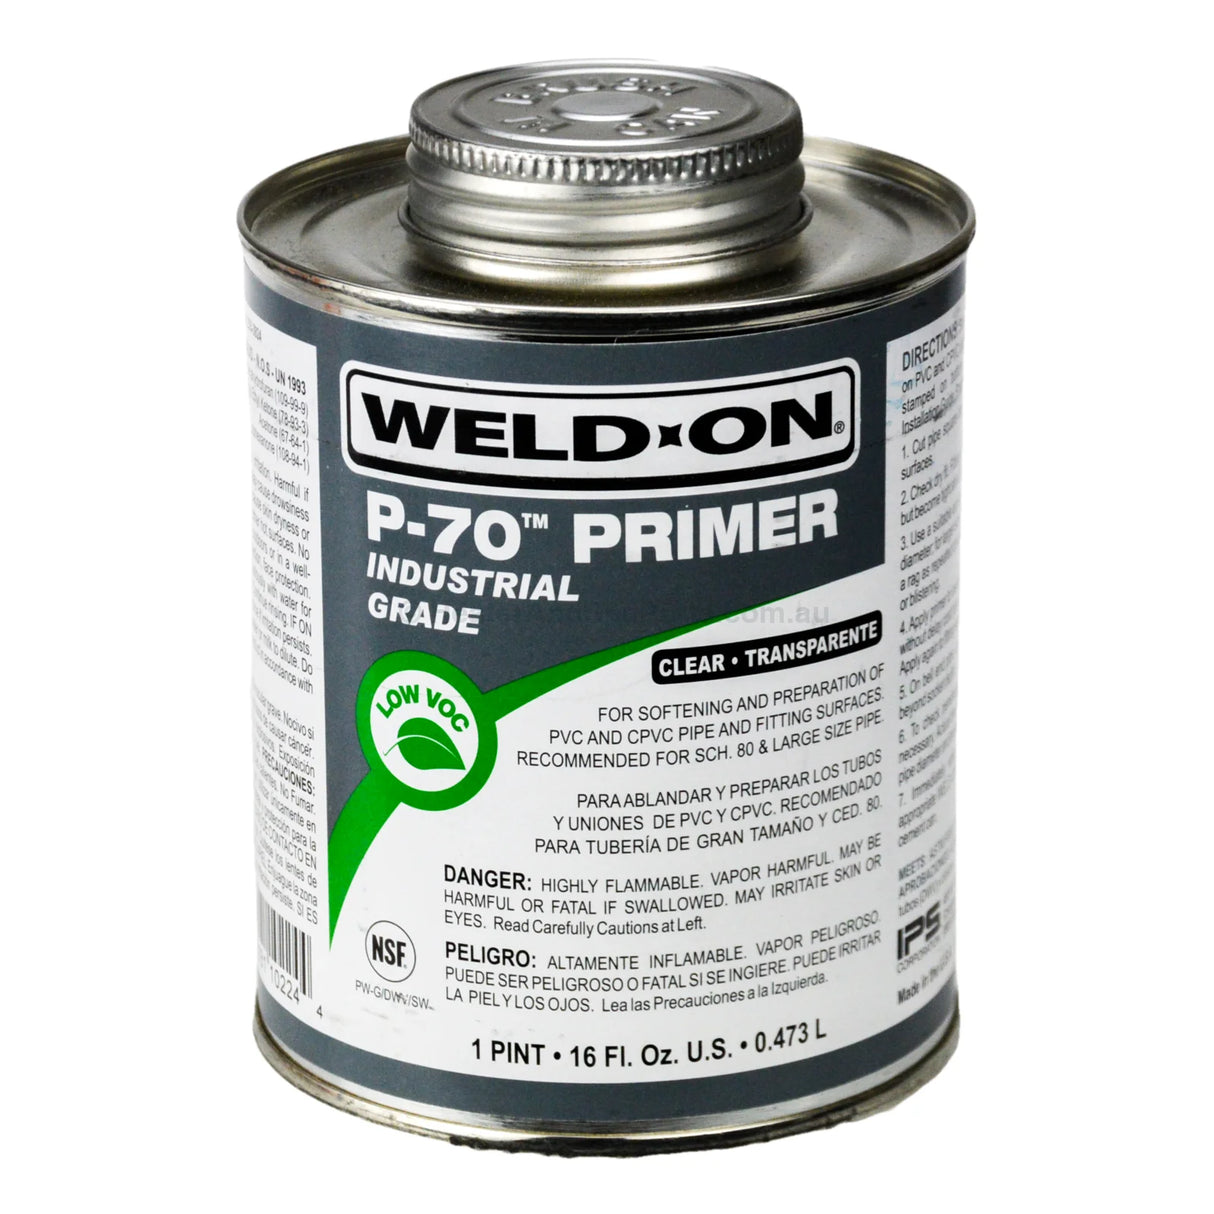 P-70 Industrial-Grade IPS Weld-on Clear Primer - 473mL - Heater and Spa Parts